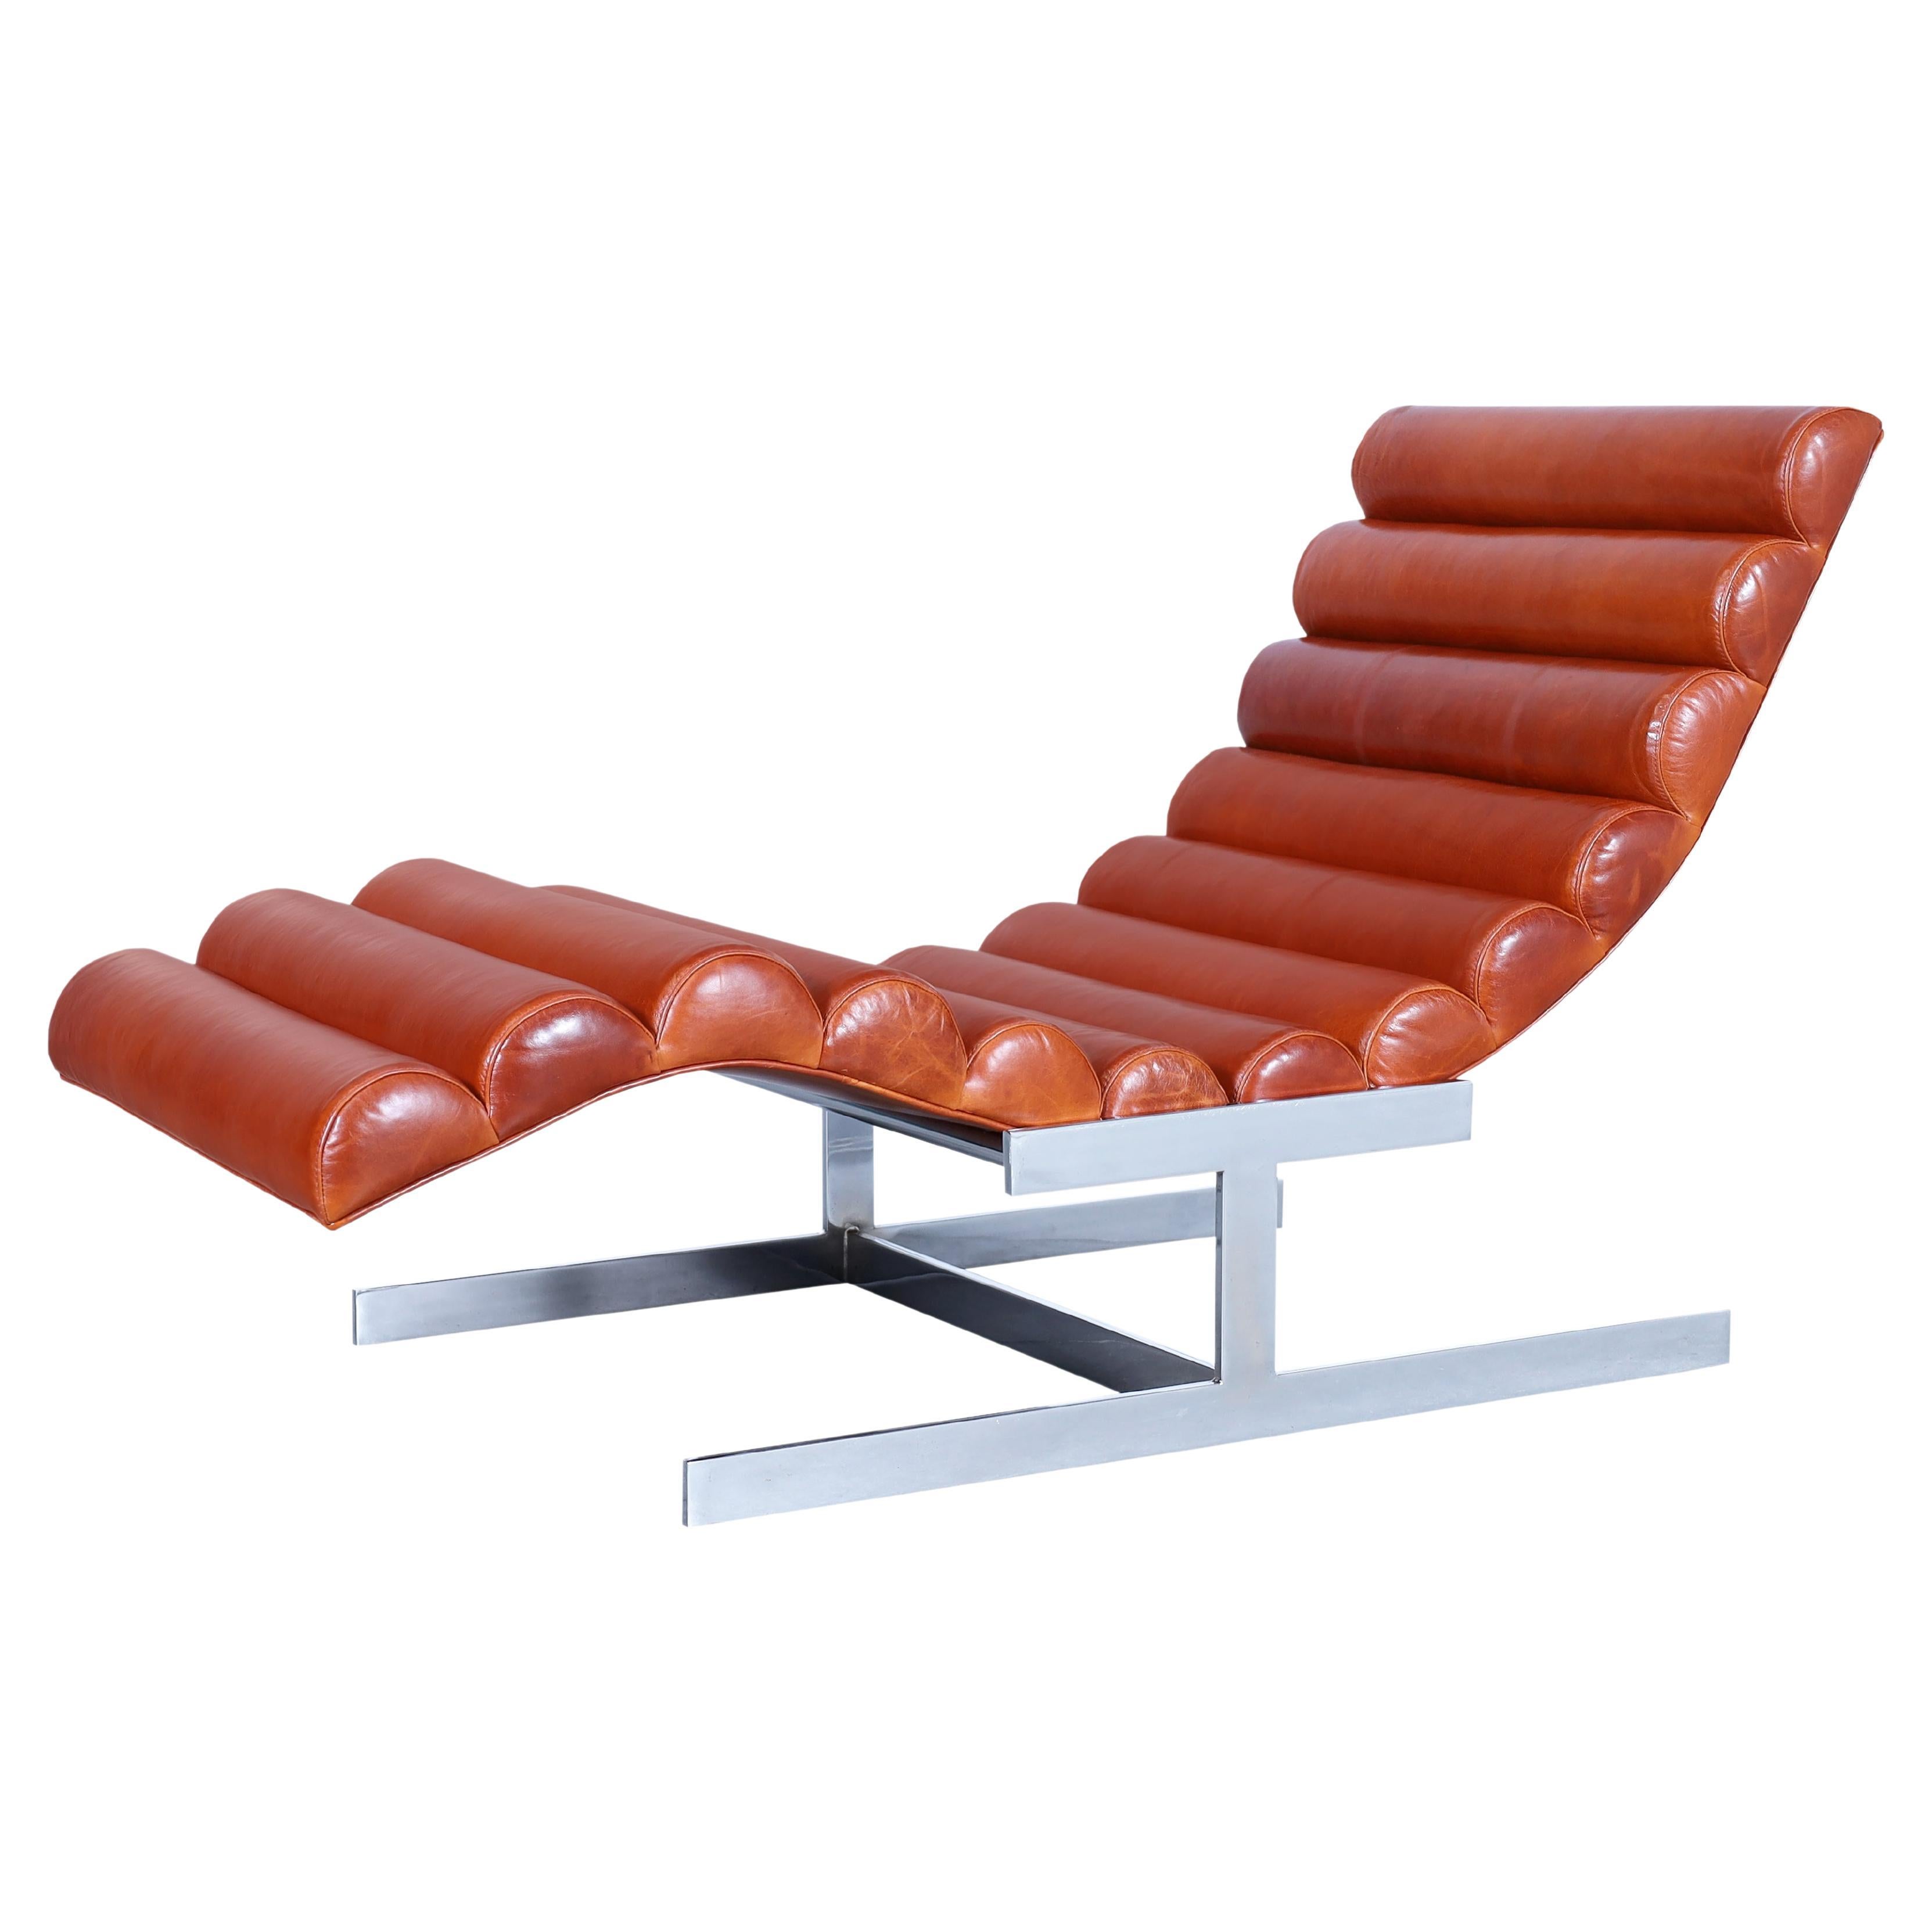 Vintage Chrome and Leather "Wave" Chaise Lounge Attributed to Milo Baughman For Sale